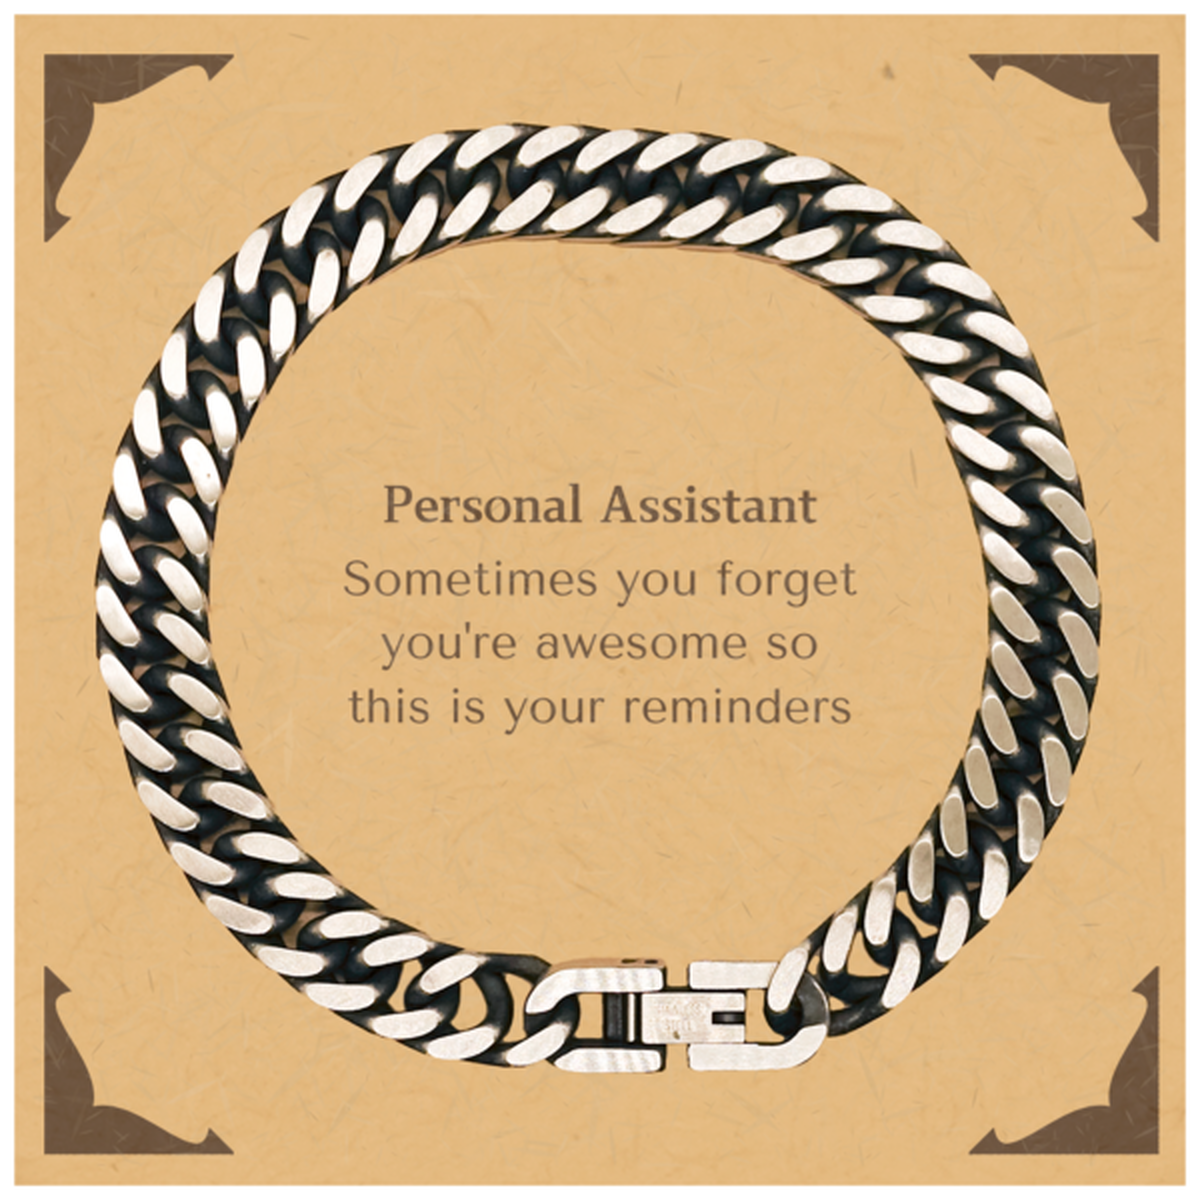 Sentimental Personal Assistant Cuban Link Chain Bracelet, Personal Assistant Sometimes you forget you're awesome so this is your reminders, Graduation Christmas Birthday Gifts for Personal Assistant, Men, Women, Coworkers